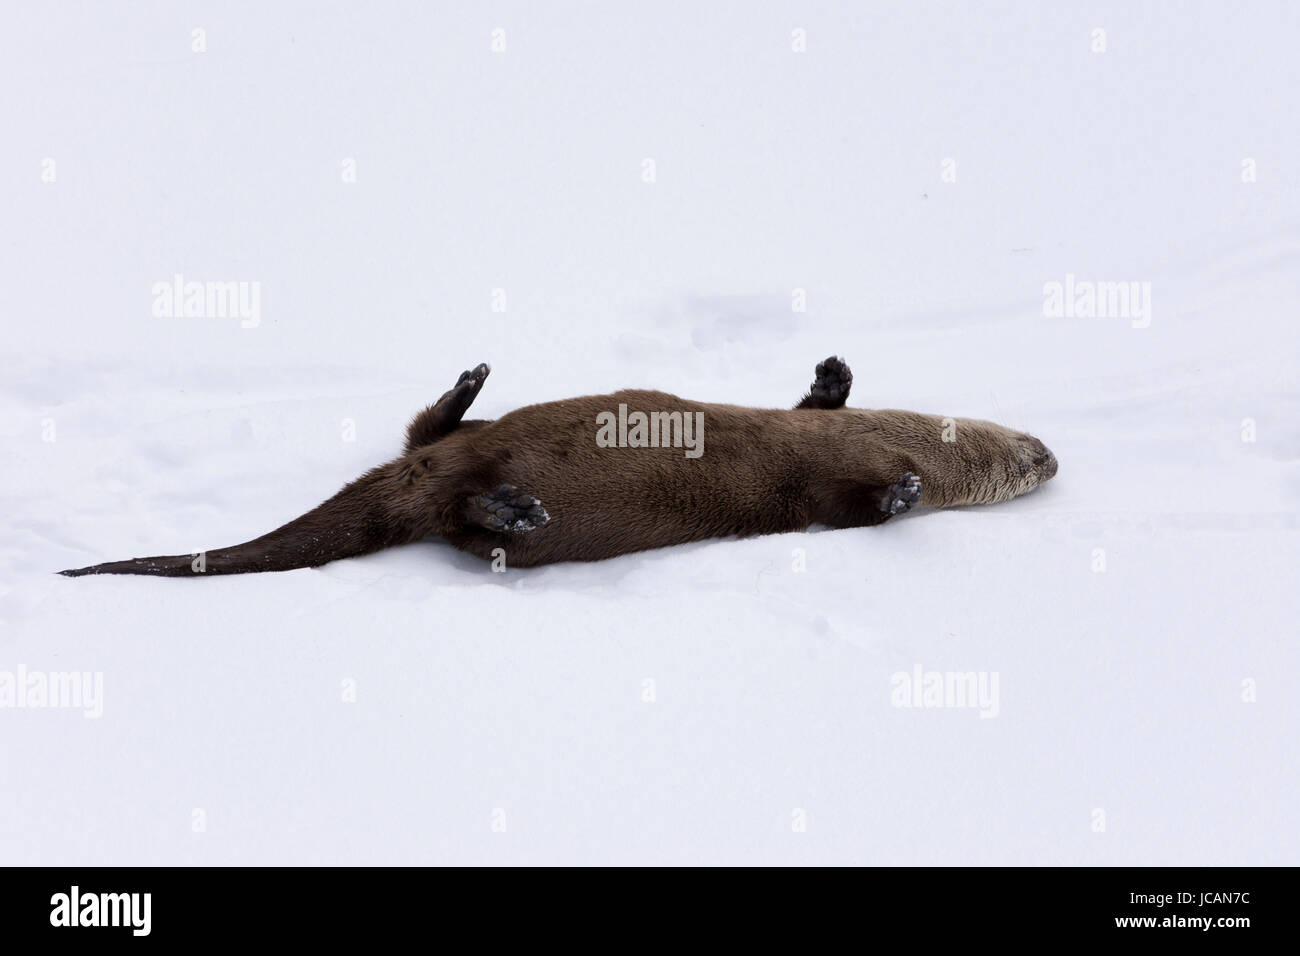 Otter relaxing in snow at Lamar valley, Yellowstone National Park February 2017. Stock Photo